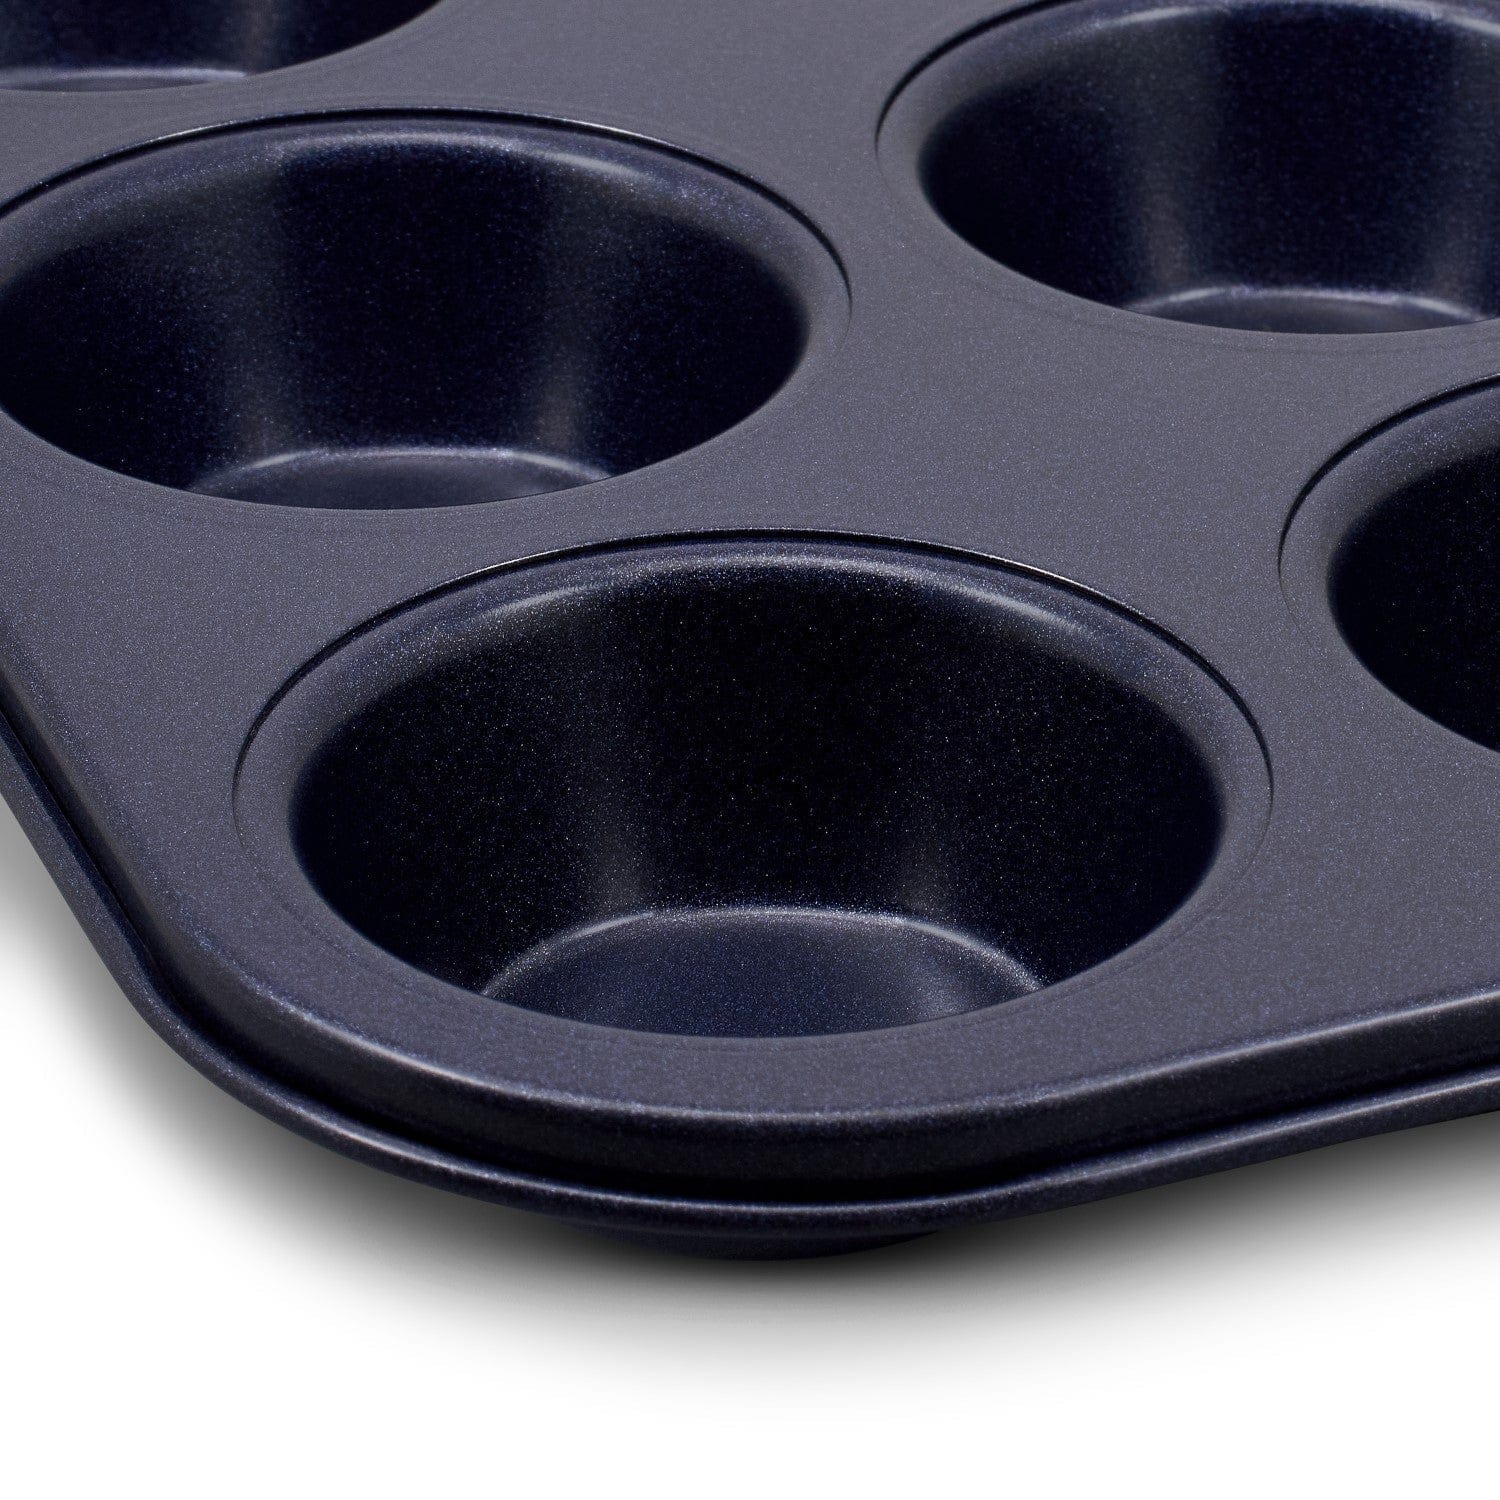 Nonstick 12 Hole Muffin Pan